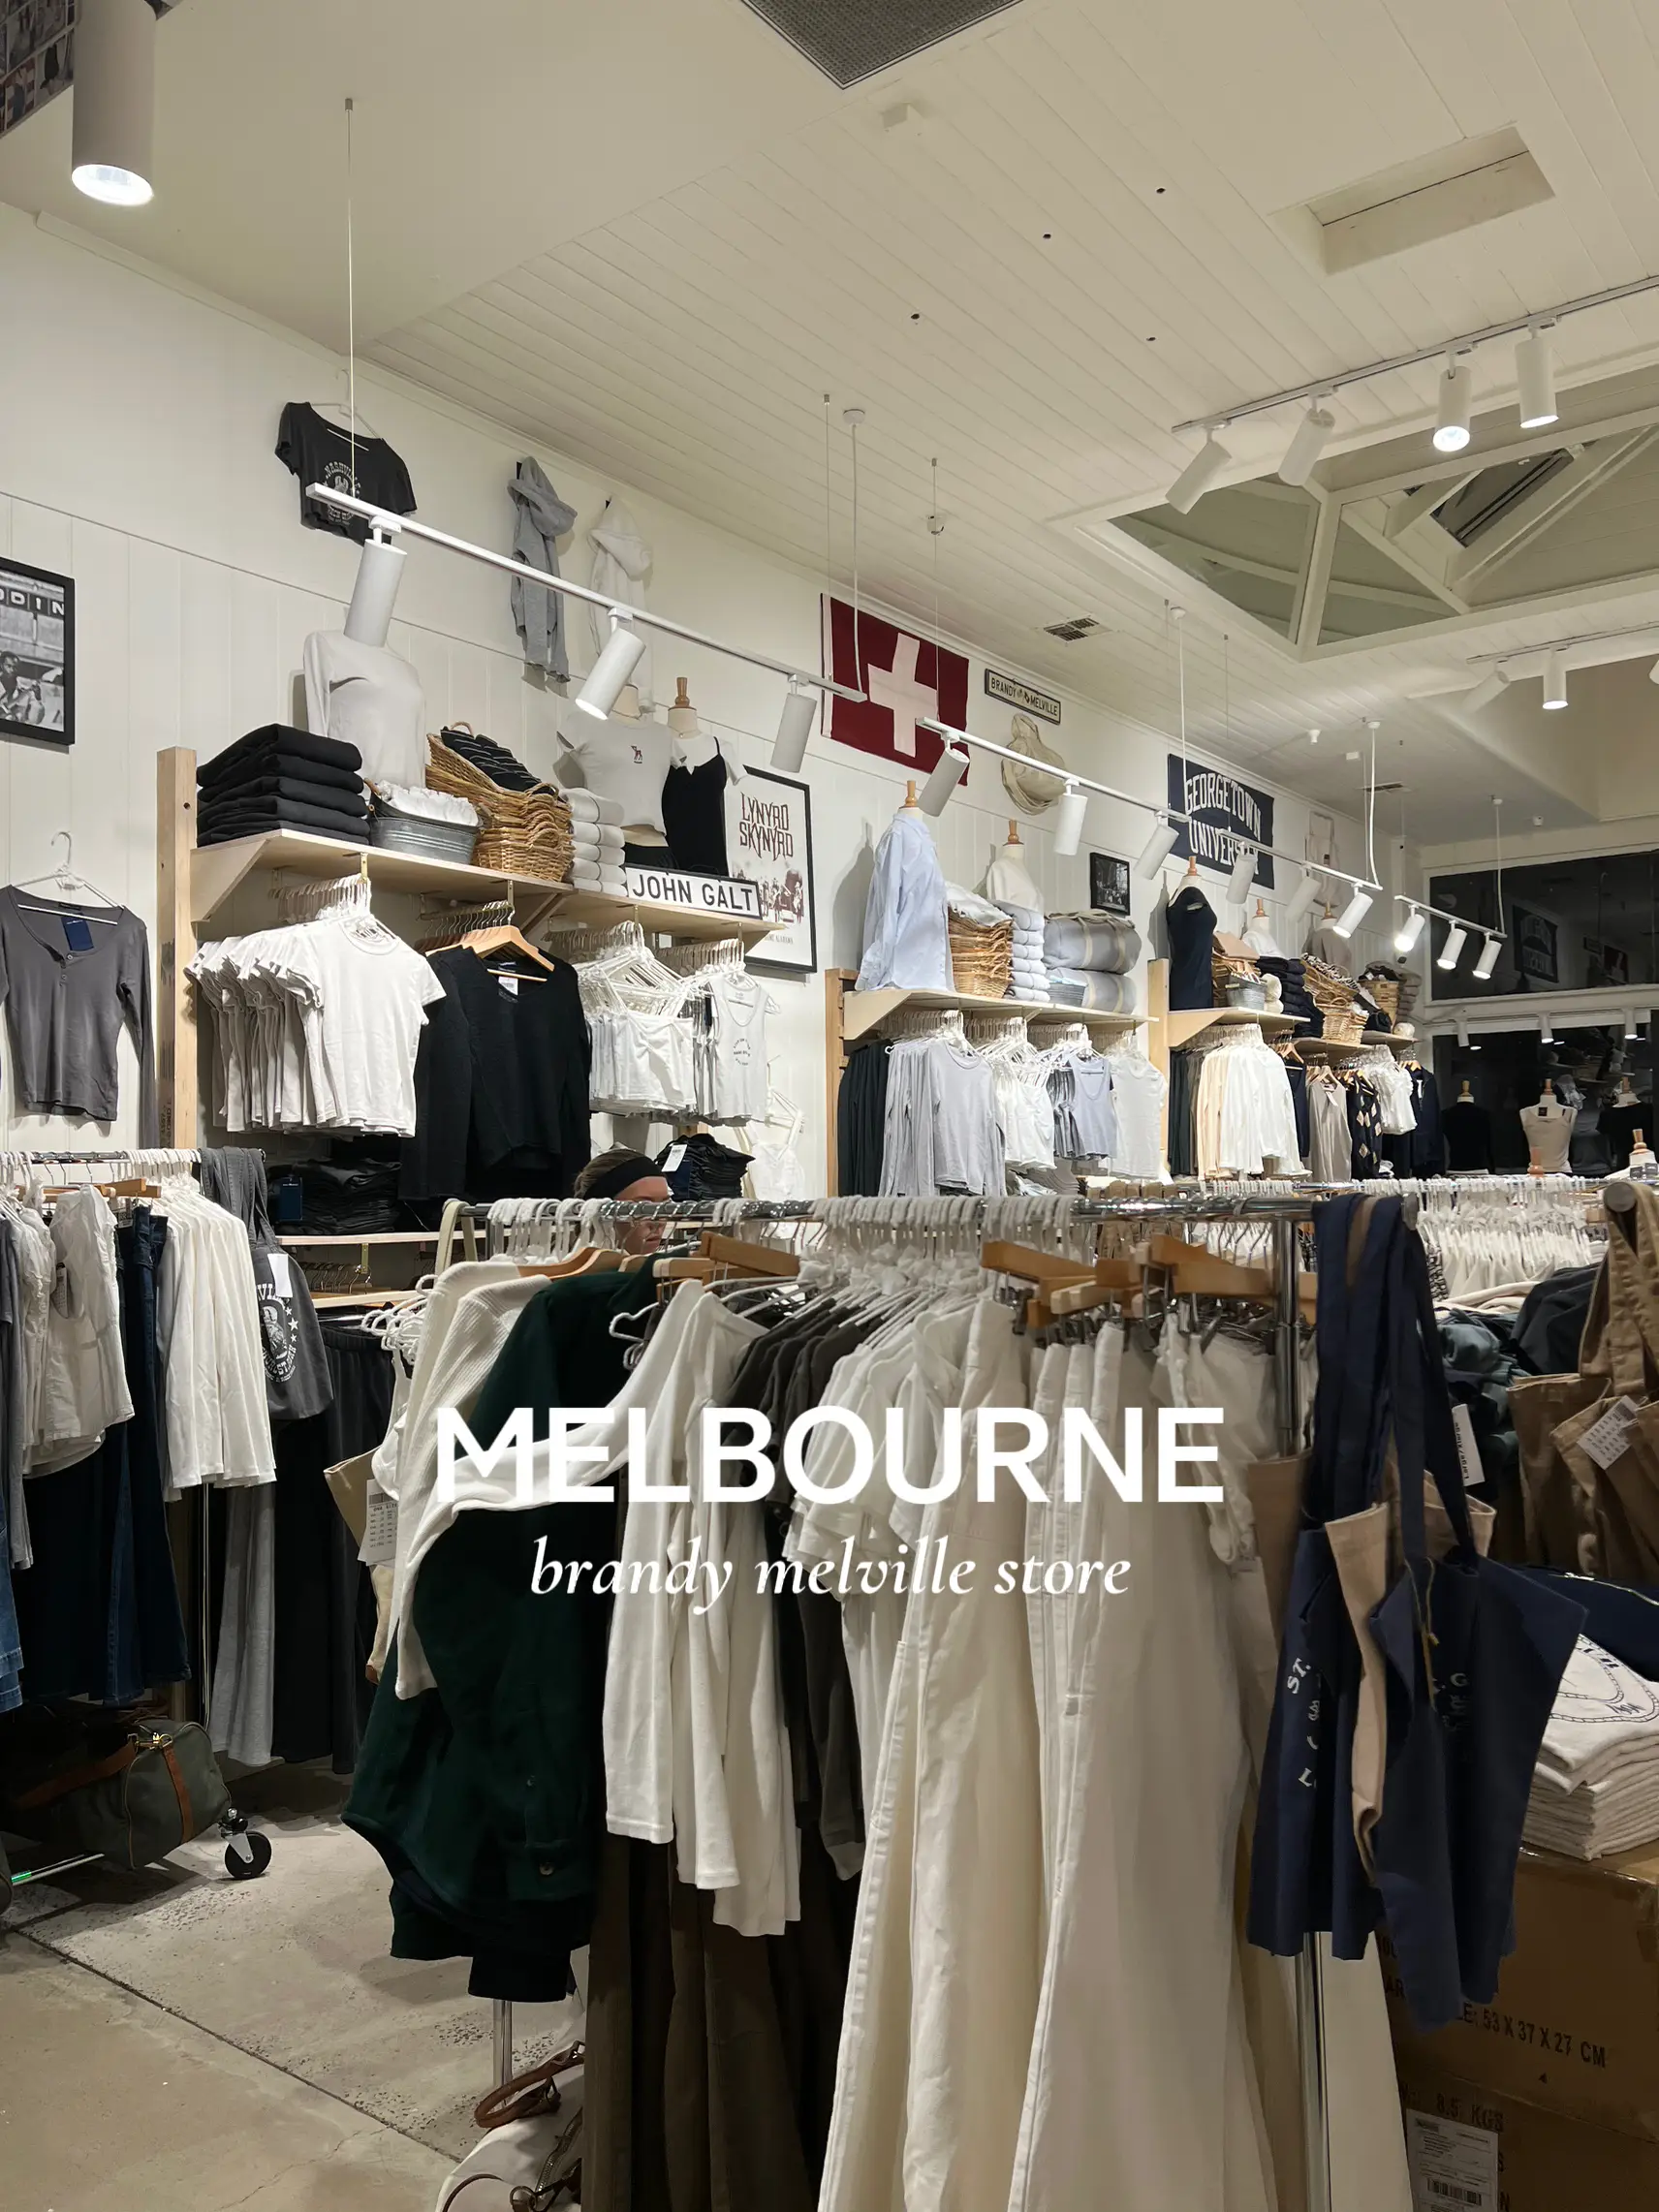 Visiting Melbourne's only Brandy Melville!, Gallery posted by phhoebeliew